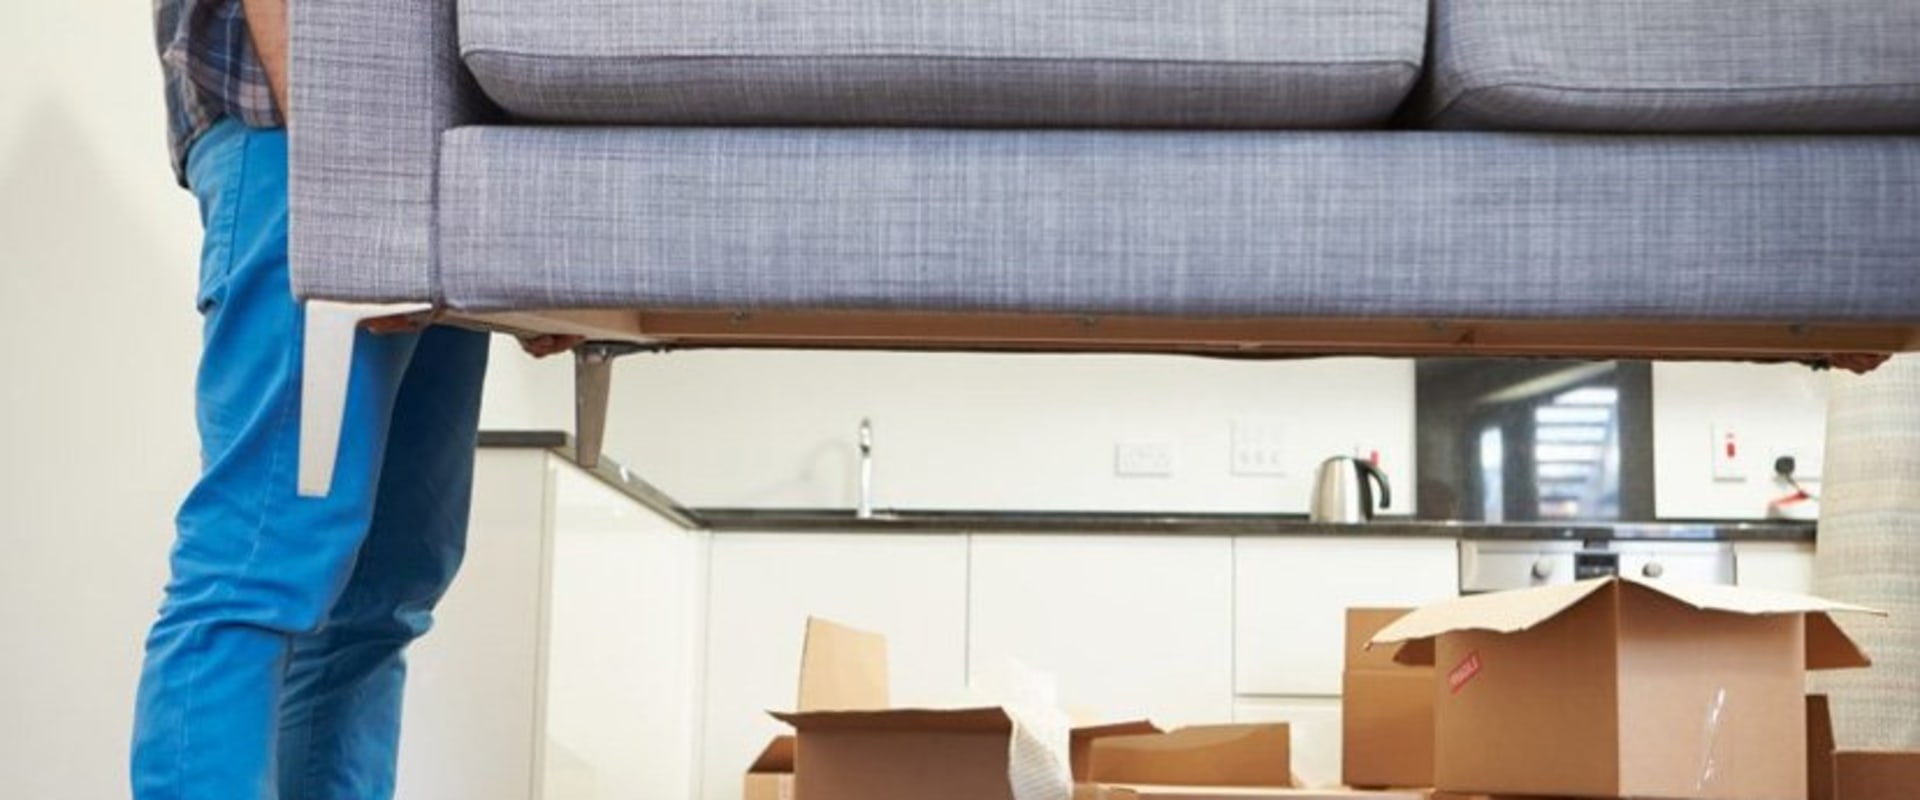 Furniture Moving Services: Finding the Best Company for Your Needs